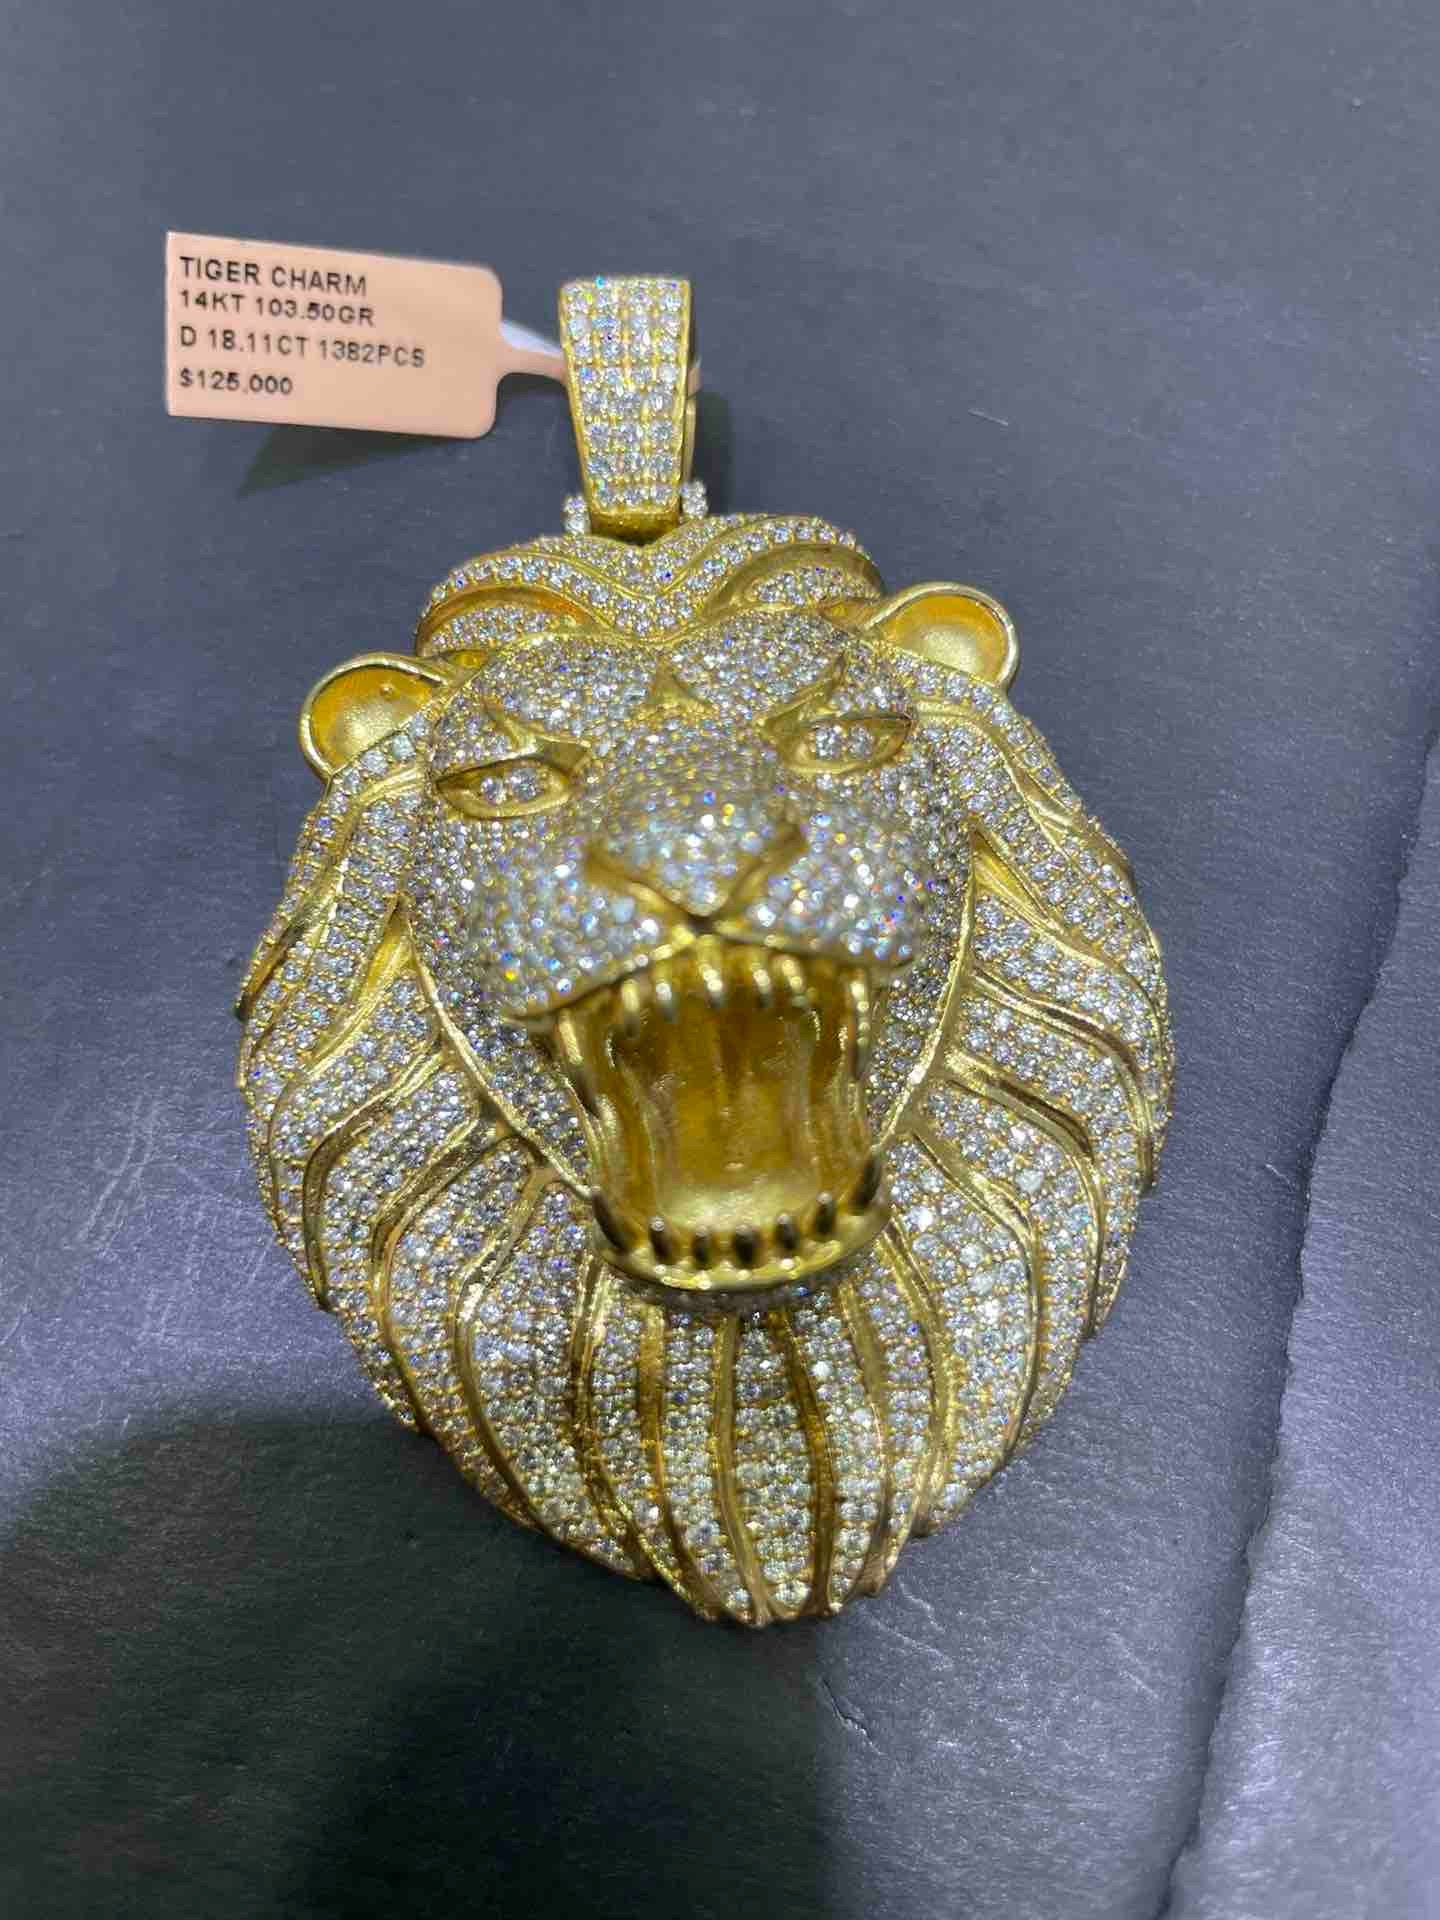 14k "Flooded" Bust Down Tiger Pendant flooded with VVS1 Natural Diamonds💎 18.11 cts (1,382 pcs, F+) 103.5 grams of 14k Yellow Gold.